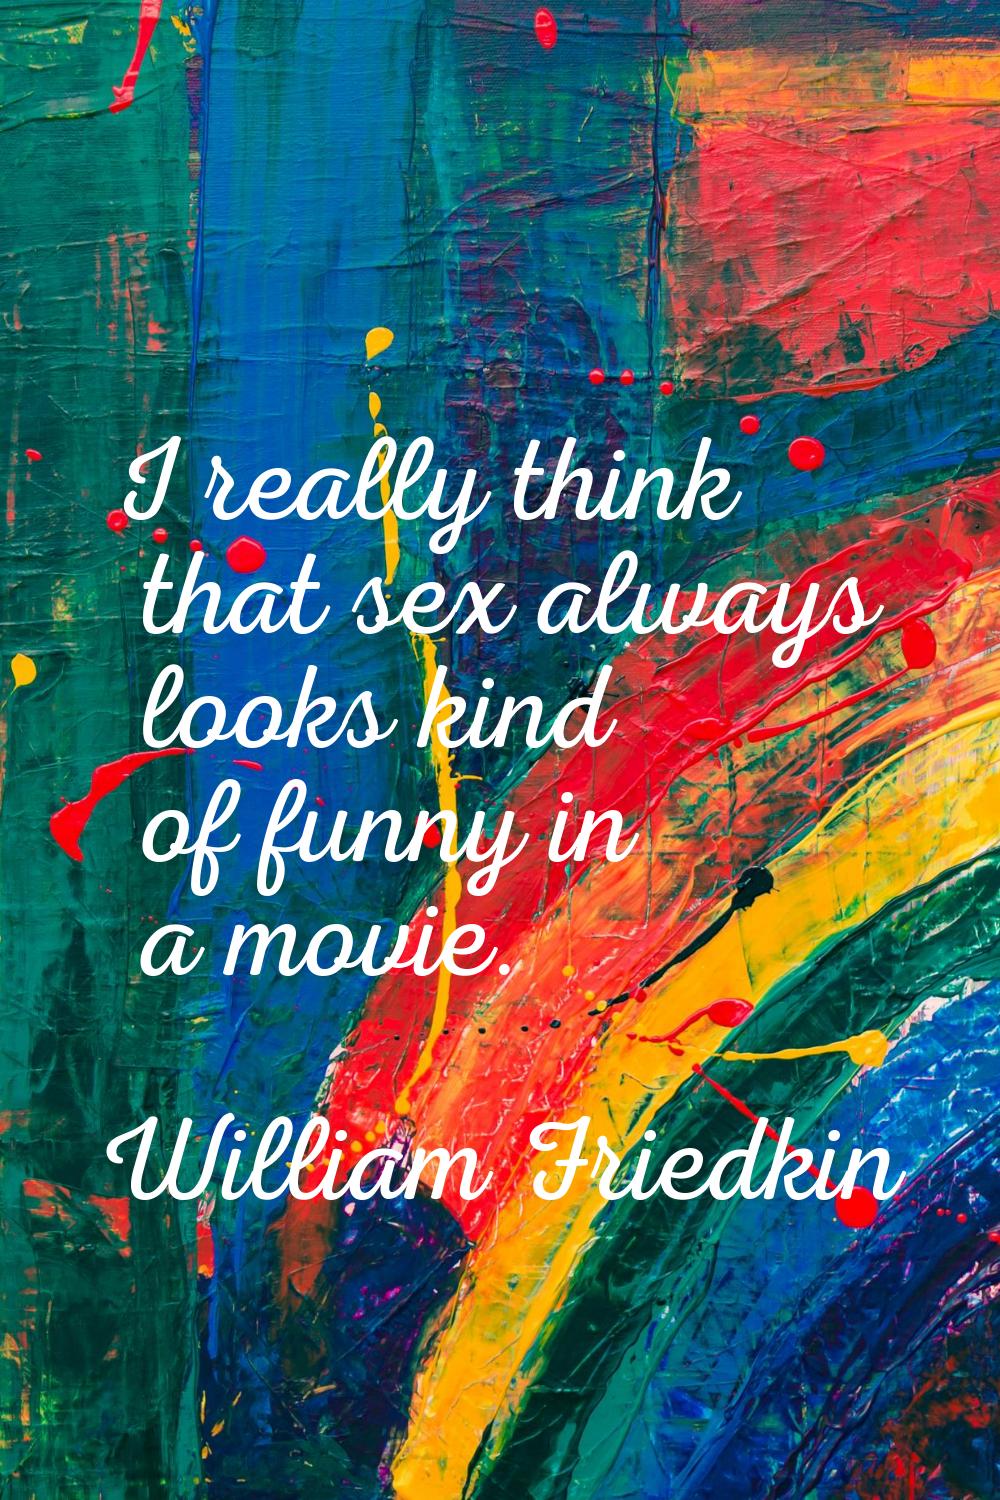 I really think that sex always looks kind of funny in a movie.